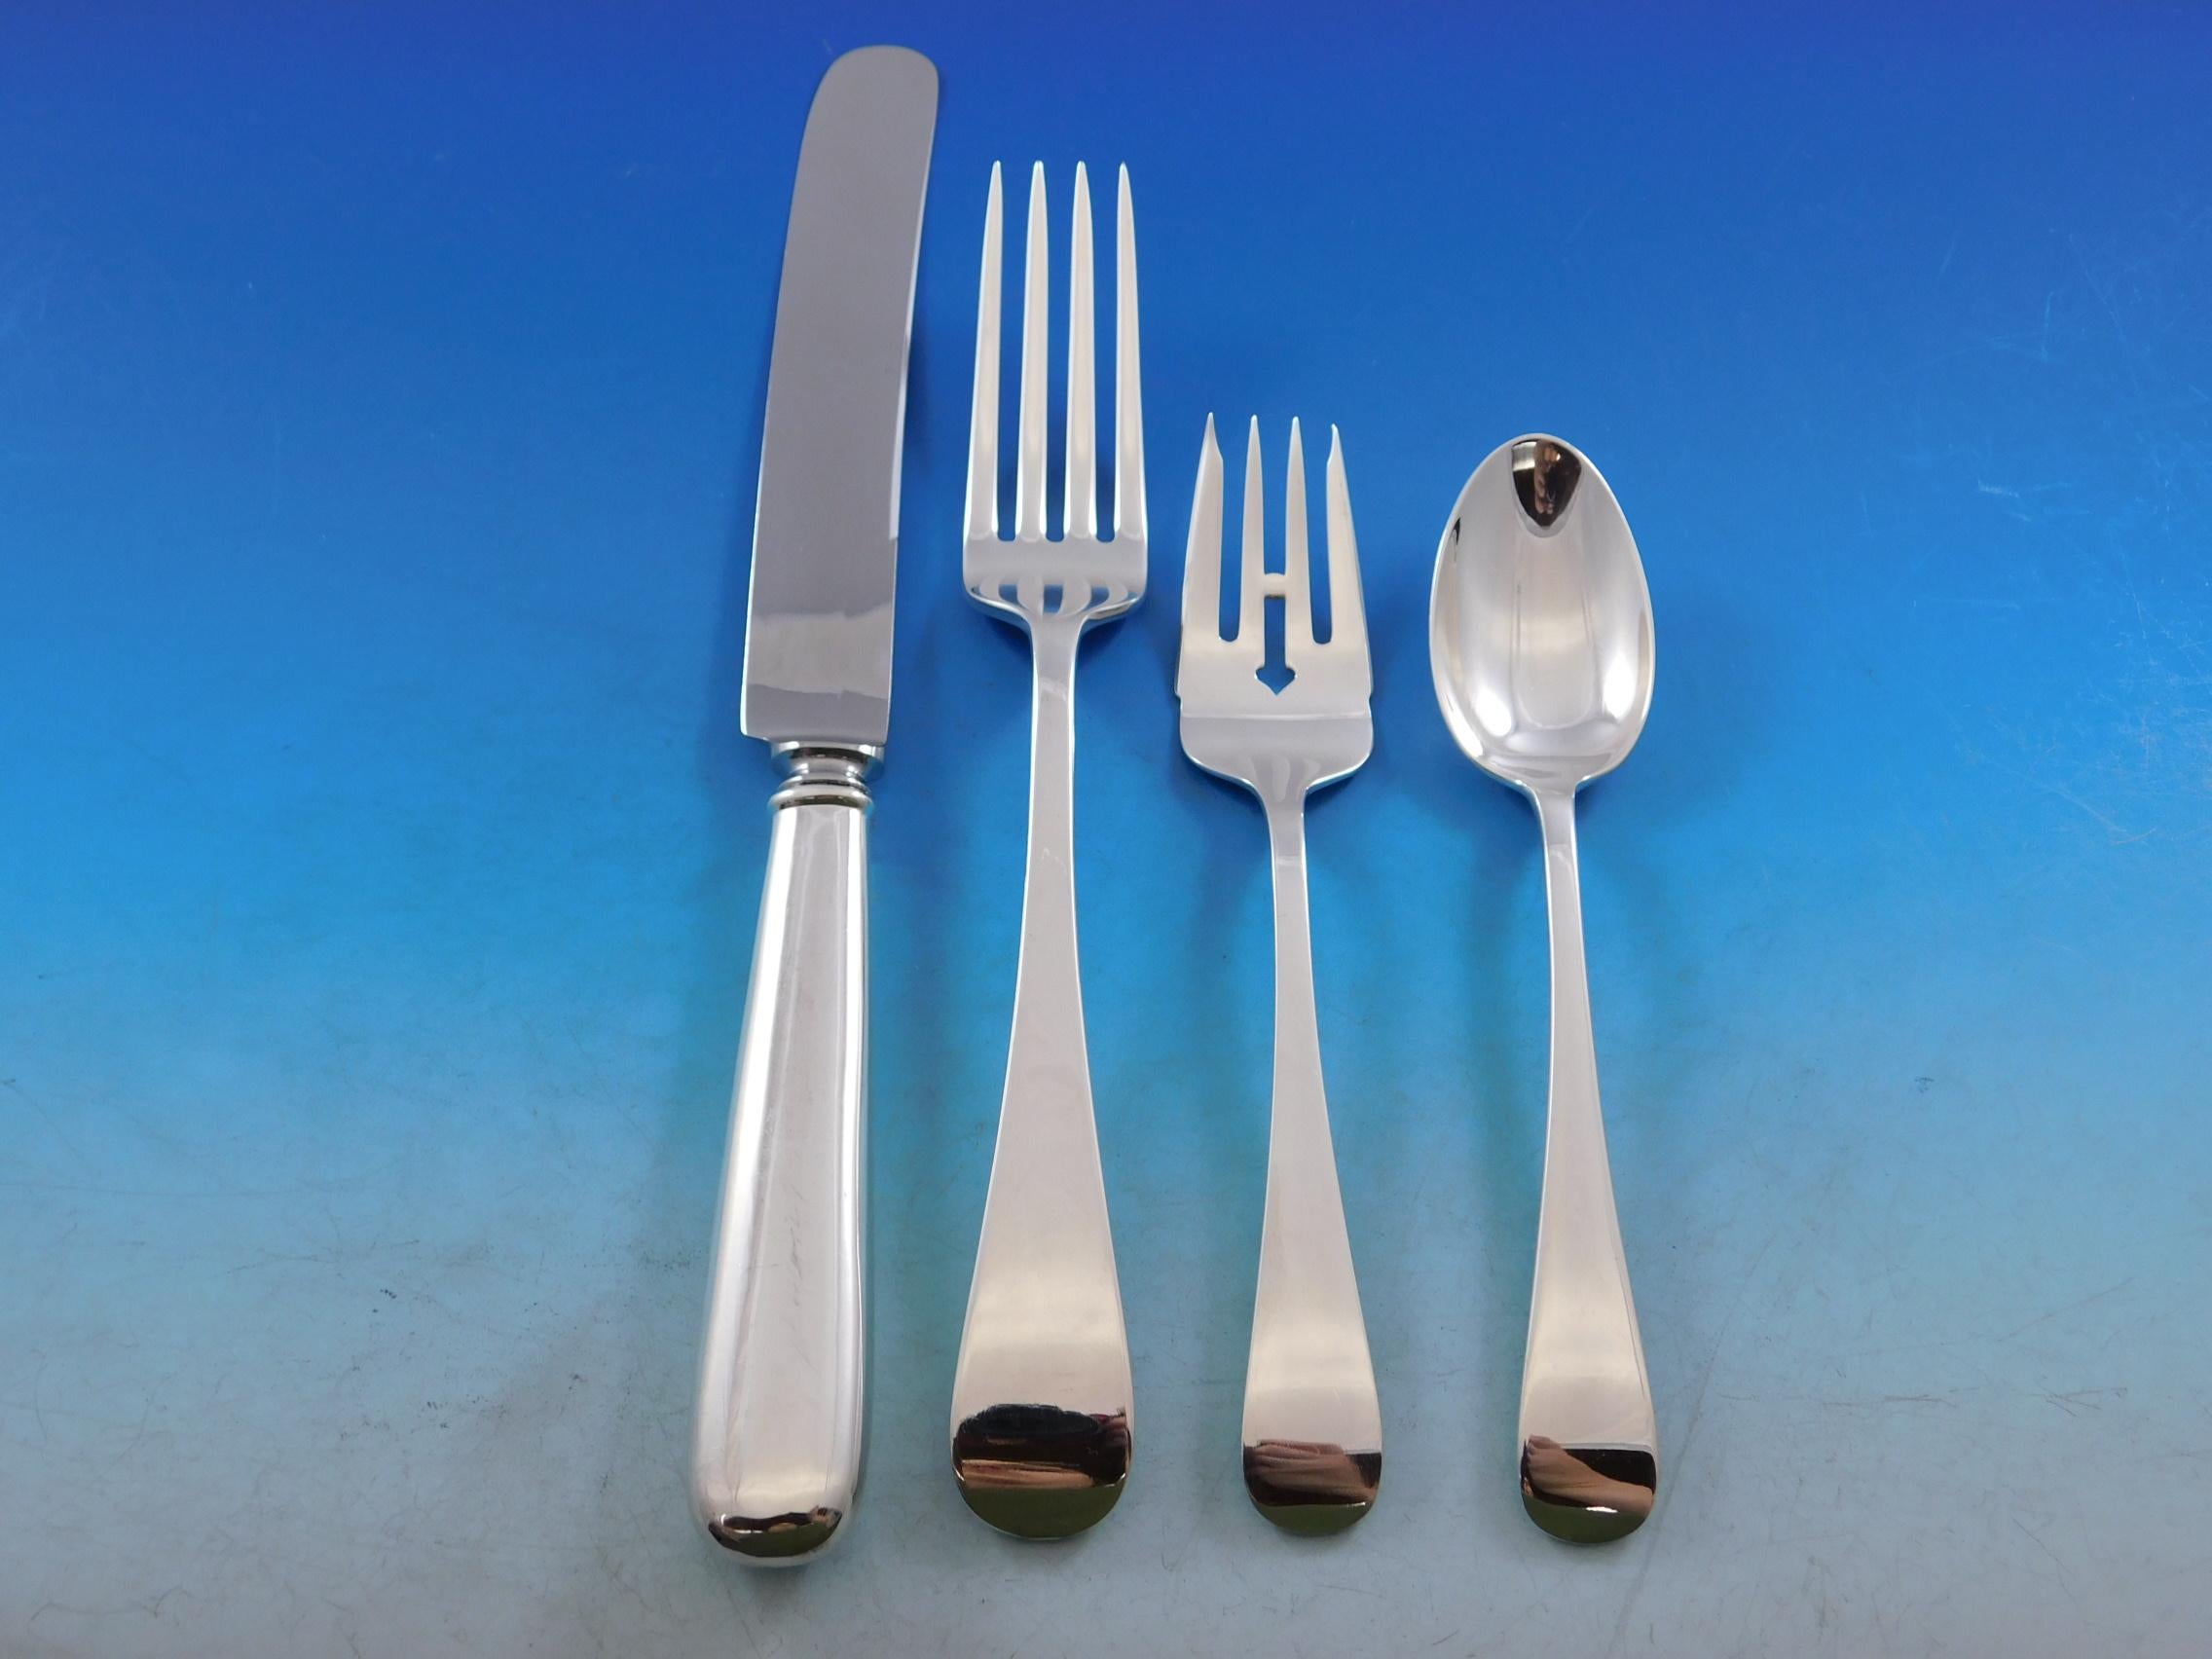 Fabulous monumental Old English antique by Dominick & Haff sterling silver Flatware set, 190 pieces. This timeless, unadorned pattern shows off the true beauty of the silver. It was introduced by D&H in the year 1880. This set includes:

12 dinner